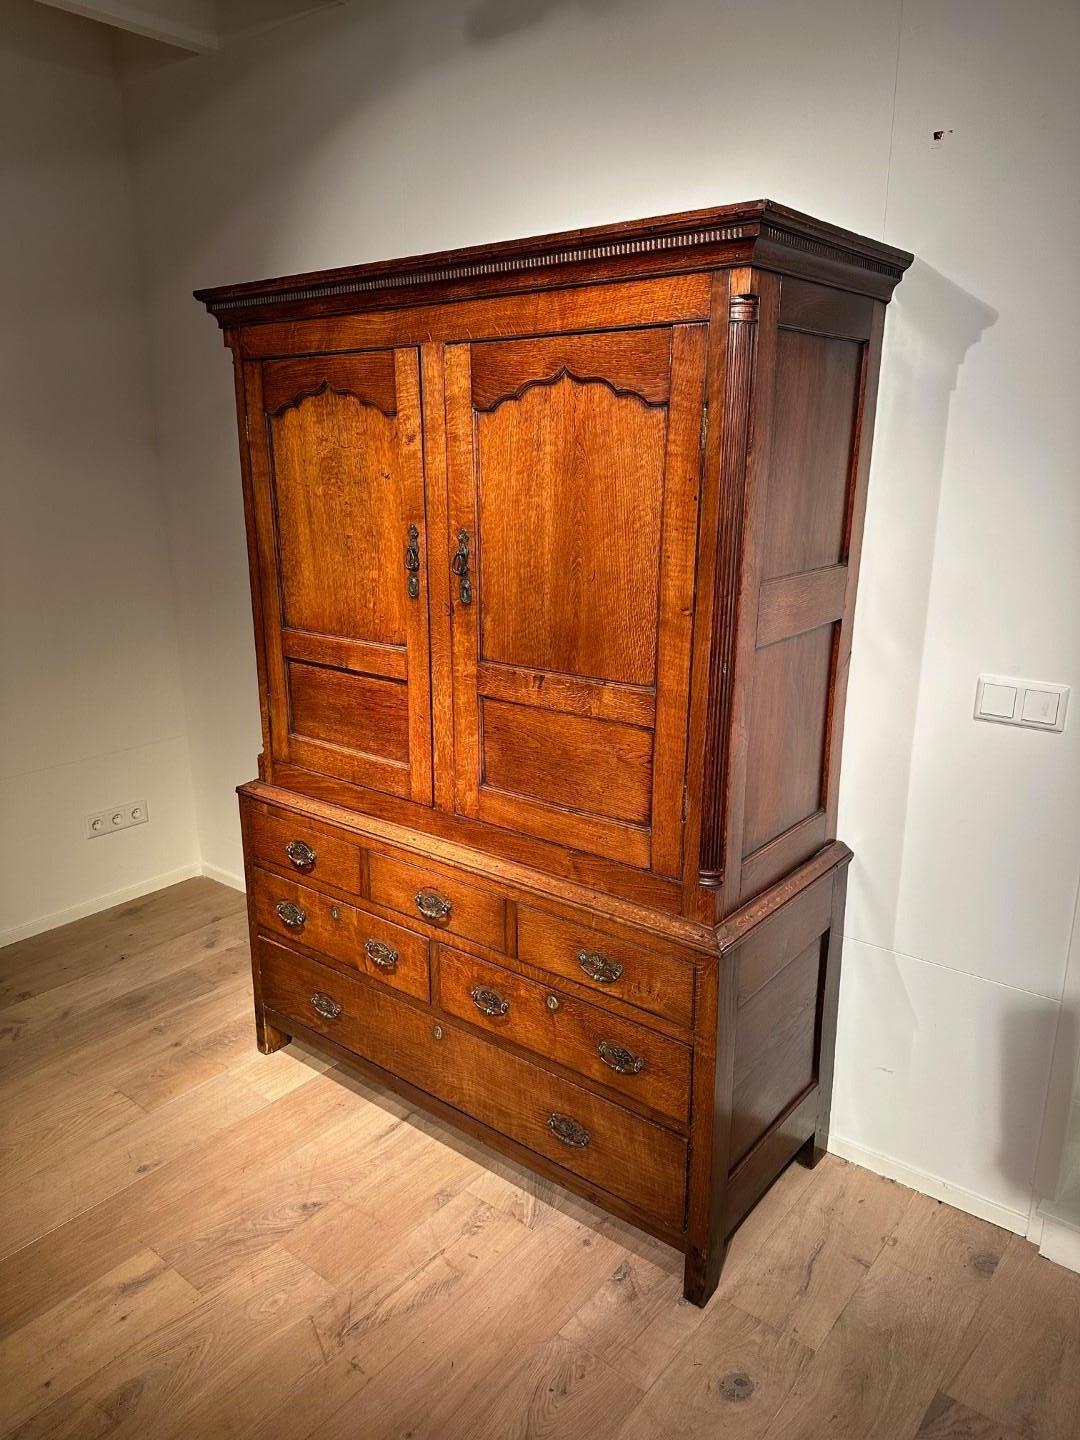 Beautiful oak Welsh cabinet from the 18th century. In perfect condition and beautiful patina. This is a classic example of a Welsh oak cabinet. This is characterized, among other things, by the fact that the 1st row of drawers are not real drawers